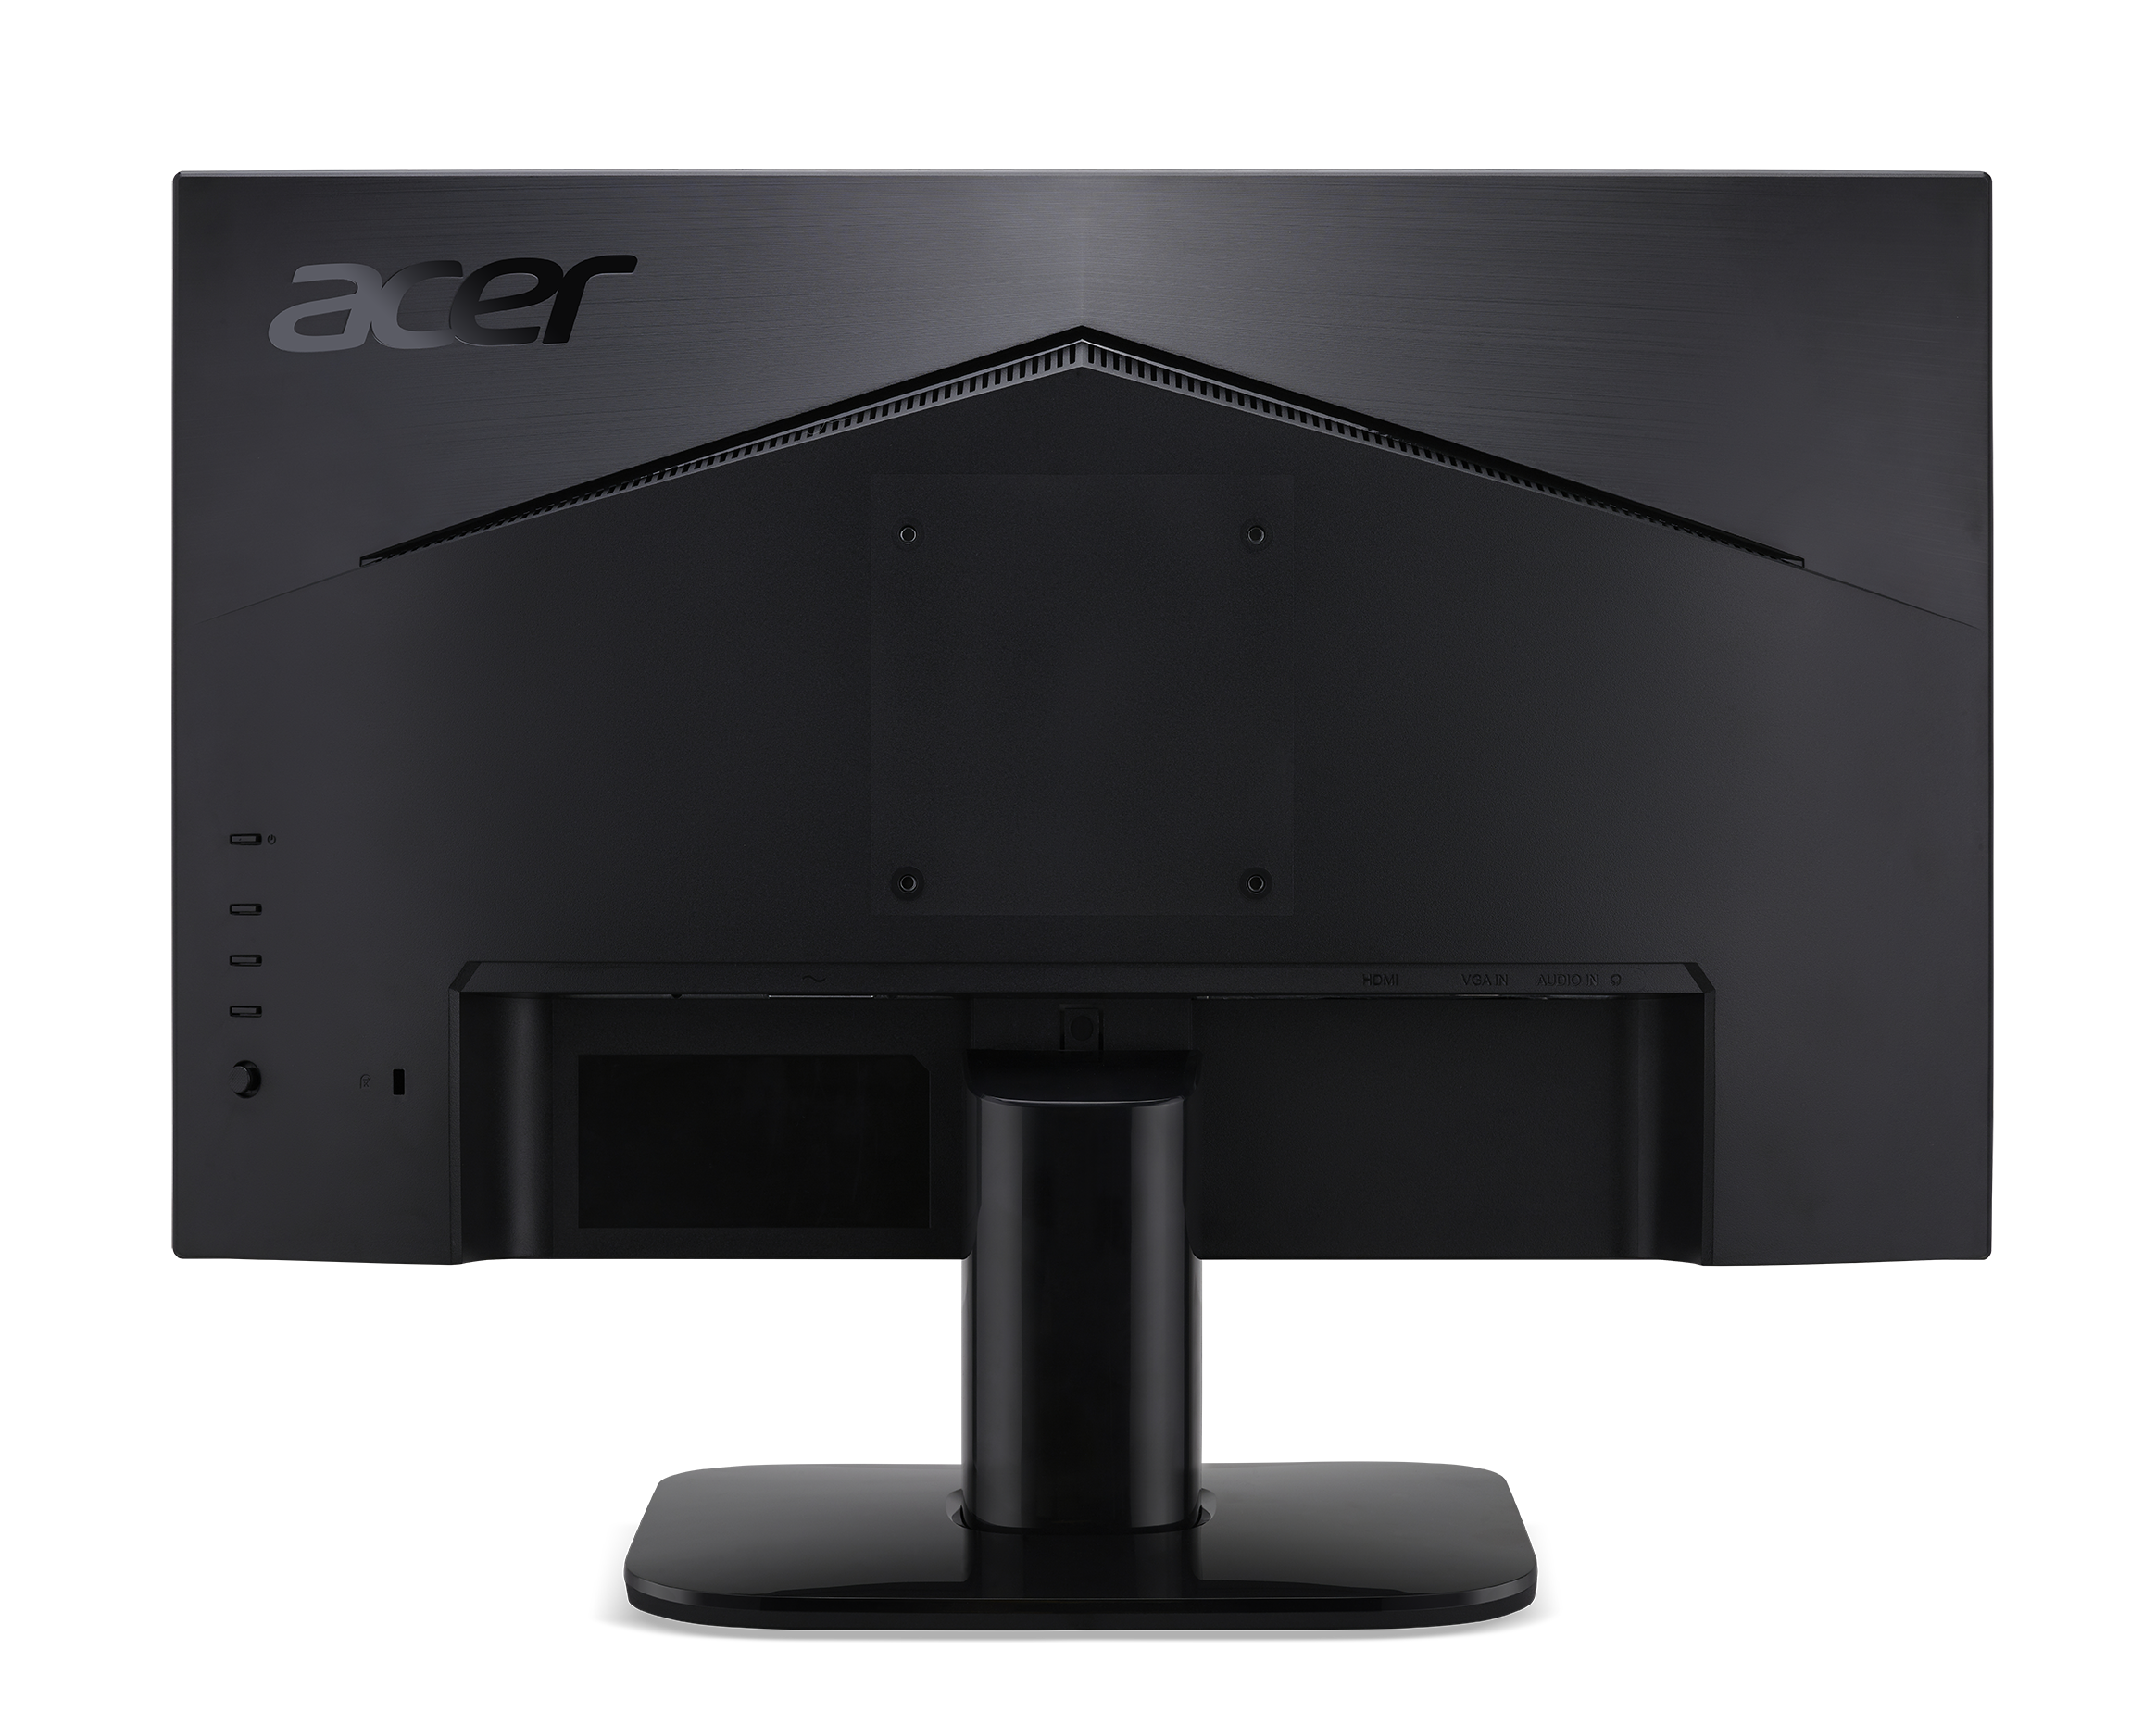 Acer KW272U bmiipx 27” WQHD 2560 x 1440 IPS Monitor with 75Hz Refresh Rate with AMD RADEON FreeSync Technology (Display Port & 2 x HDMI 1.4 Ports) - image 5 of 6